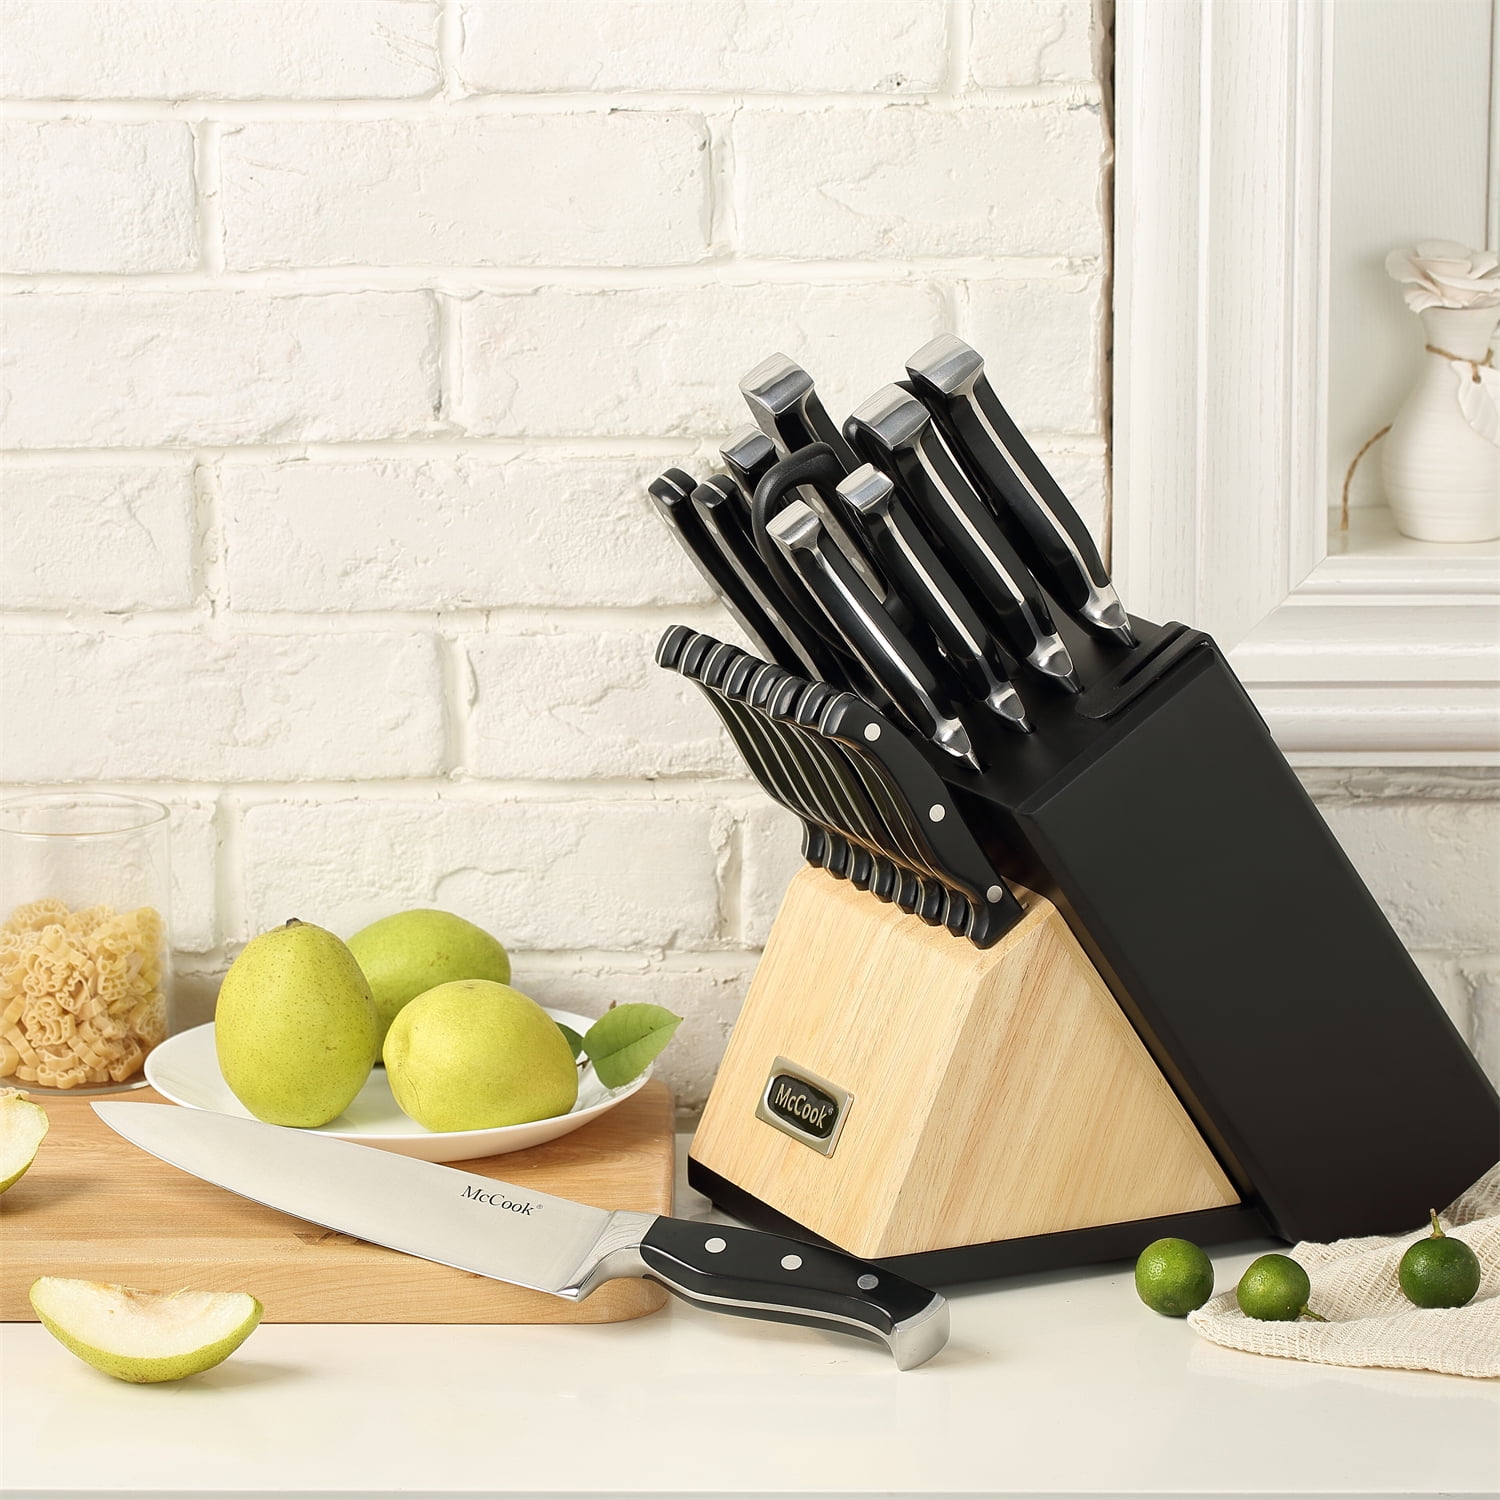 Knife Sets,McCook MC65B 20 Piece German Stainless Steel Forged Kitchen  Knife Block Set, Cutlery Set with Black Block 